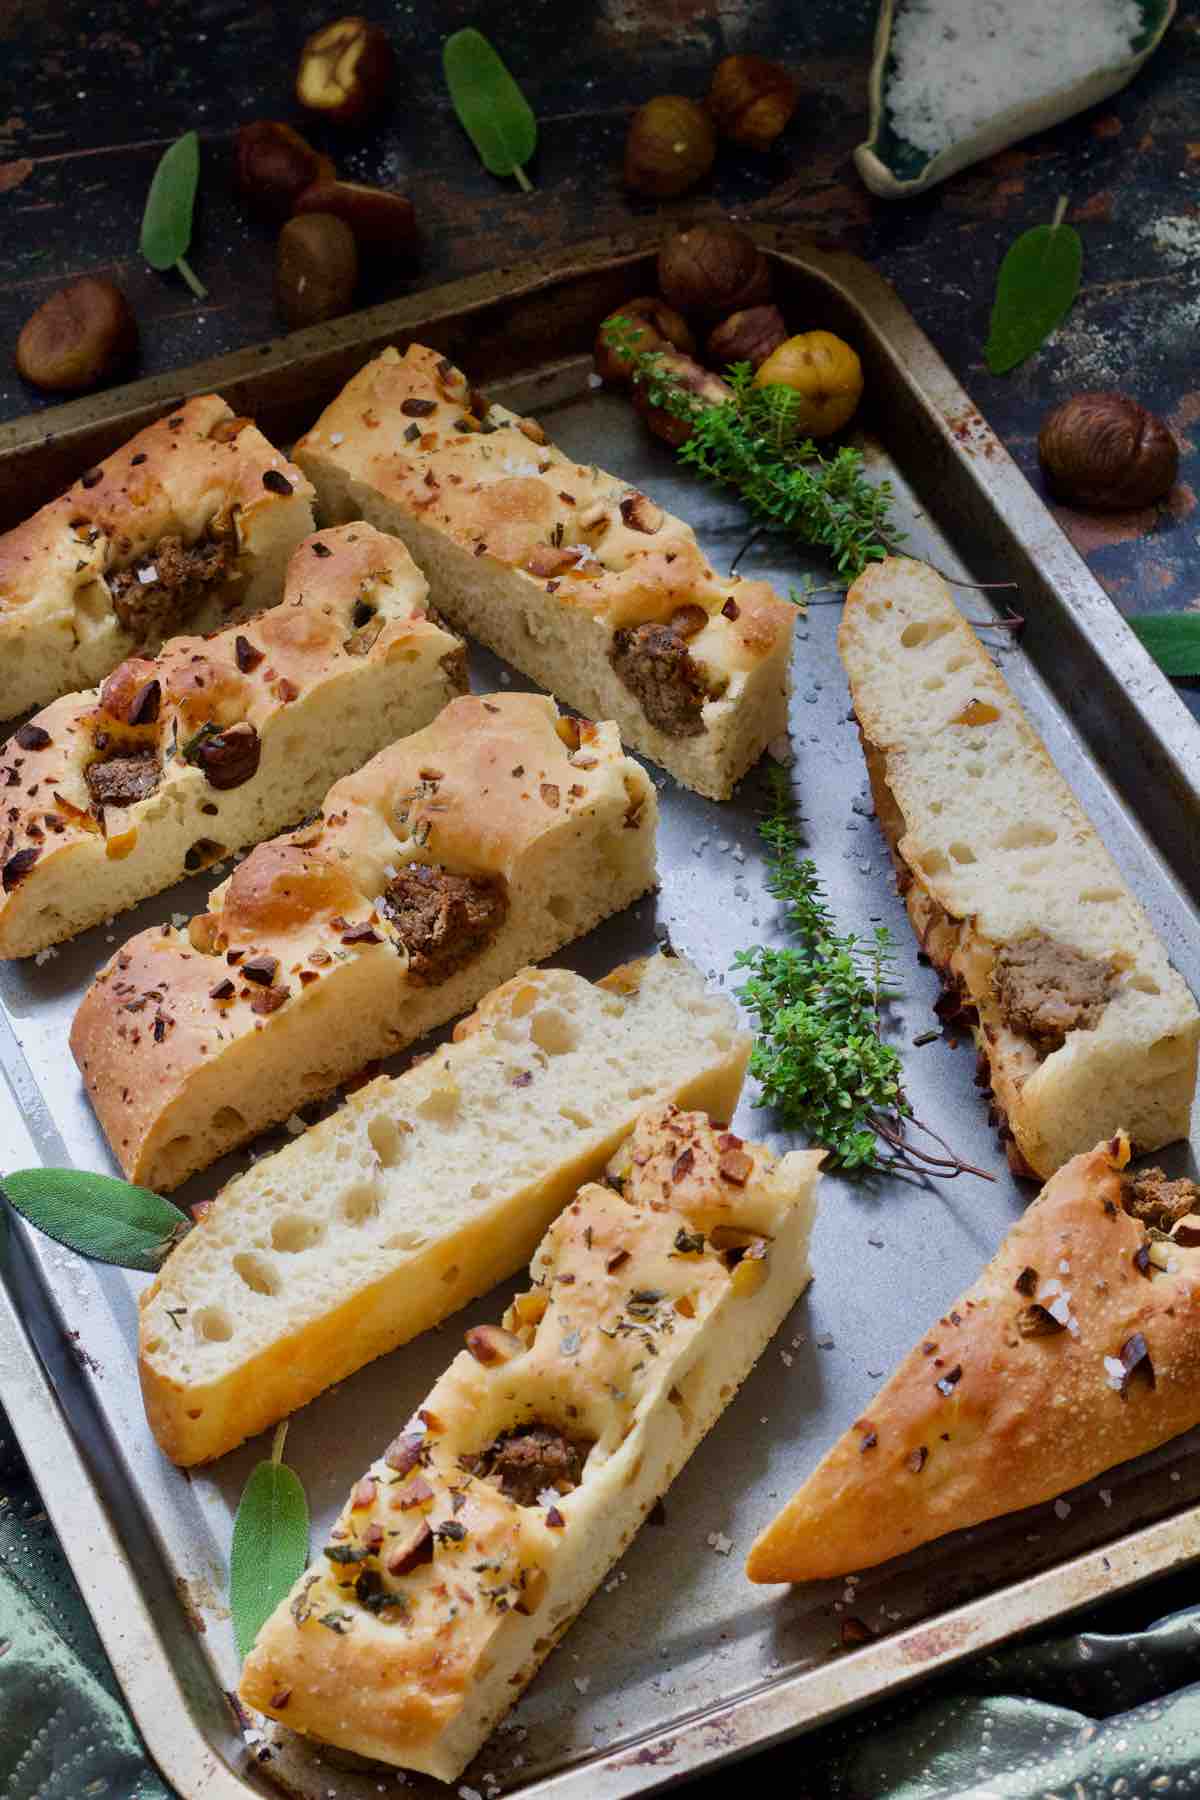 Baking tray full of focaccia slices, herbs and chestnuts.